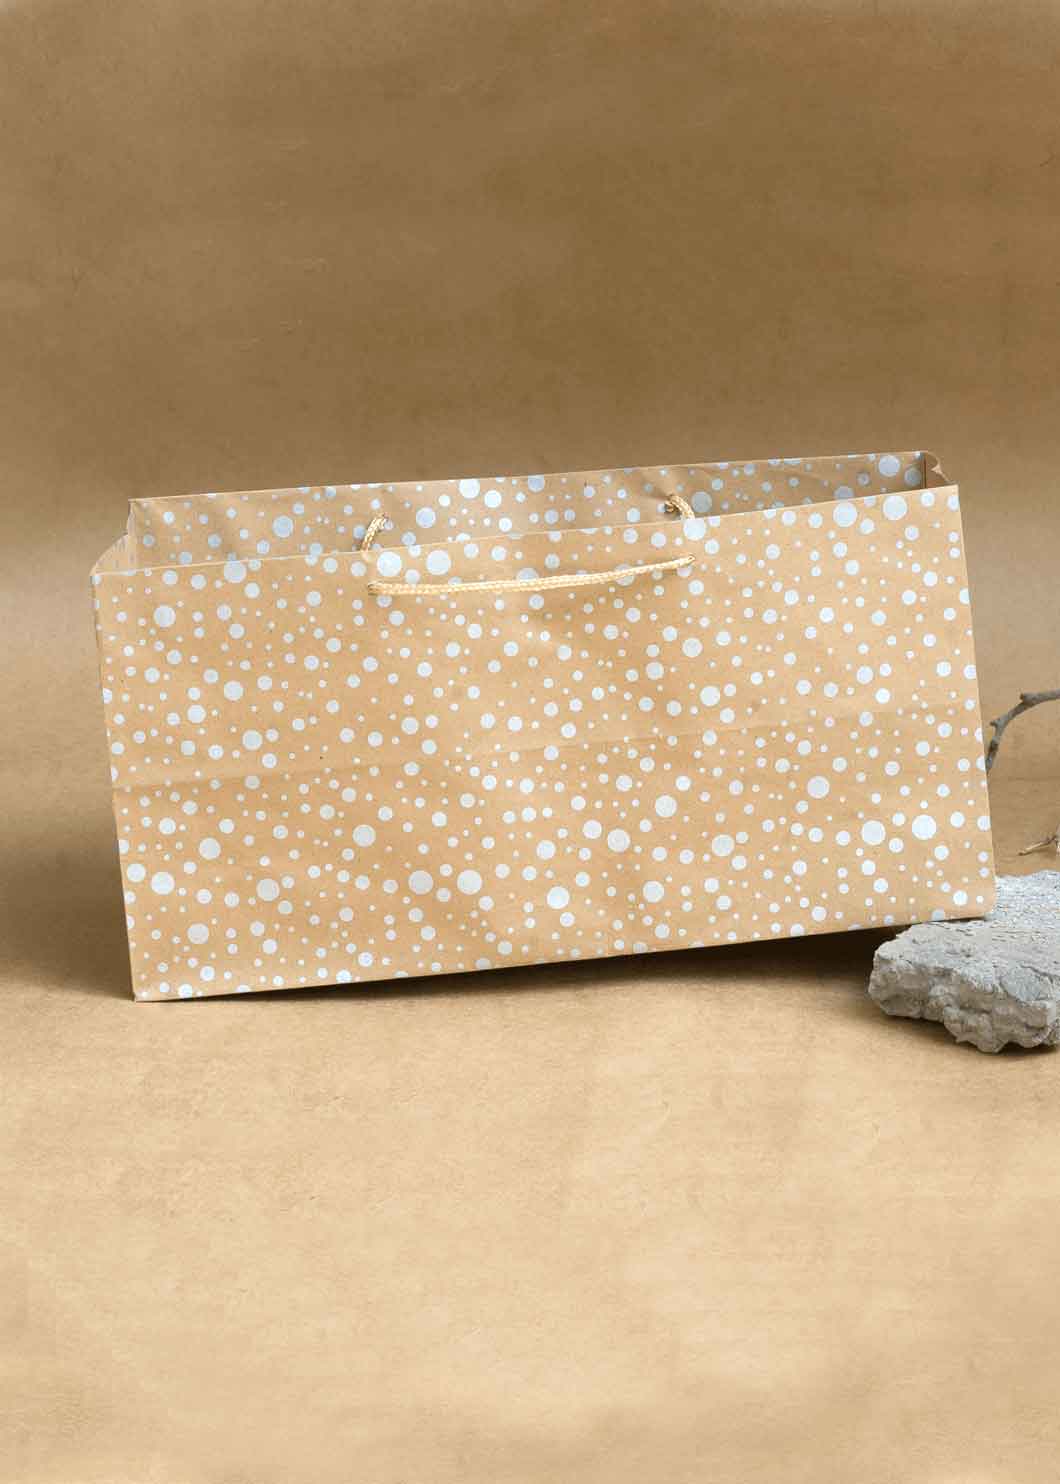 Craft Paper Bag Dots Pattern - Craft Paper Bag - Yellow Silver Red - 14x7 Square Paper Bag